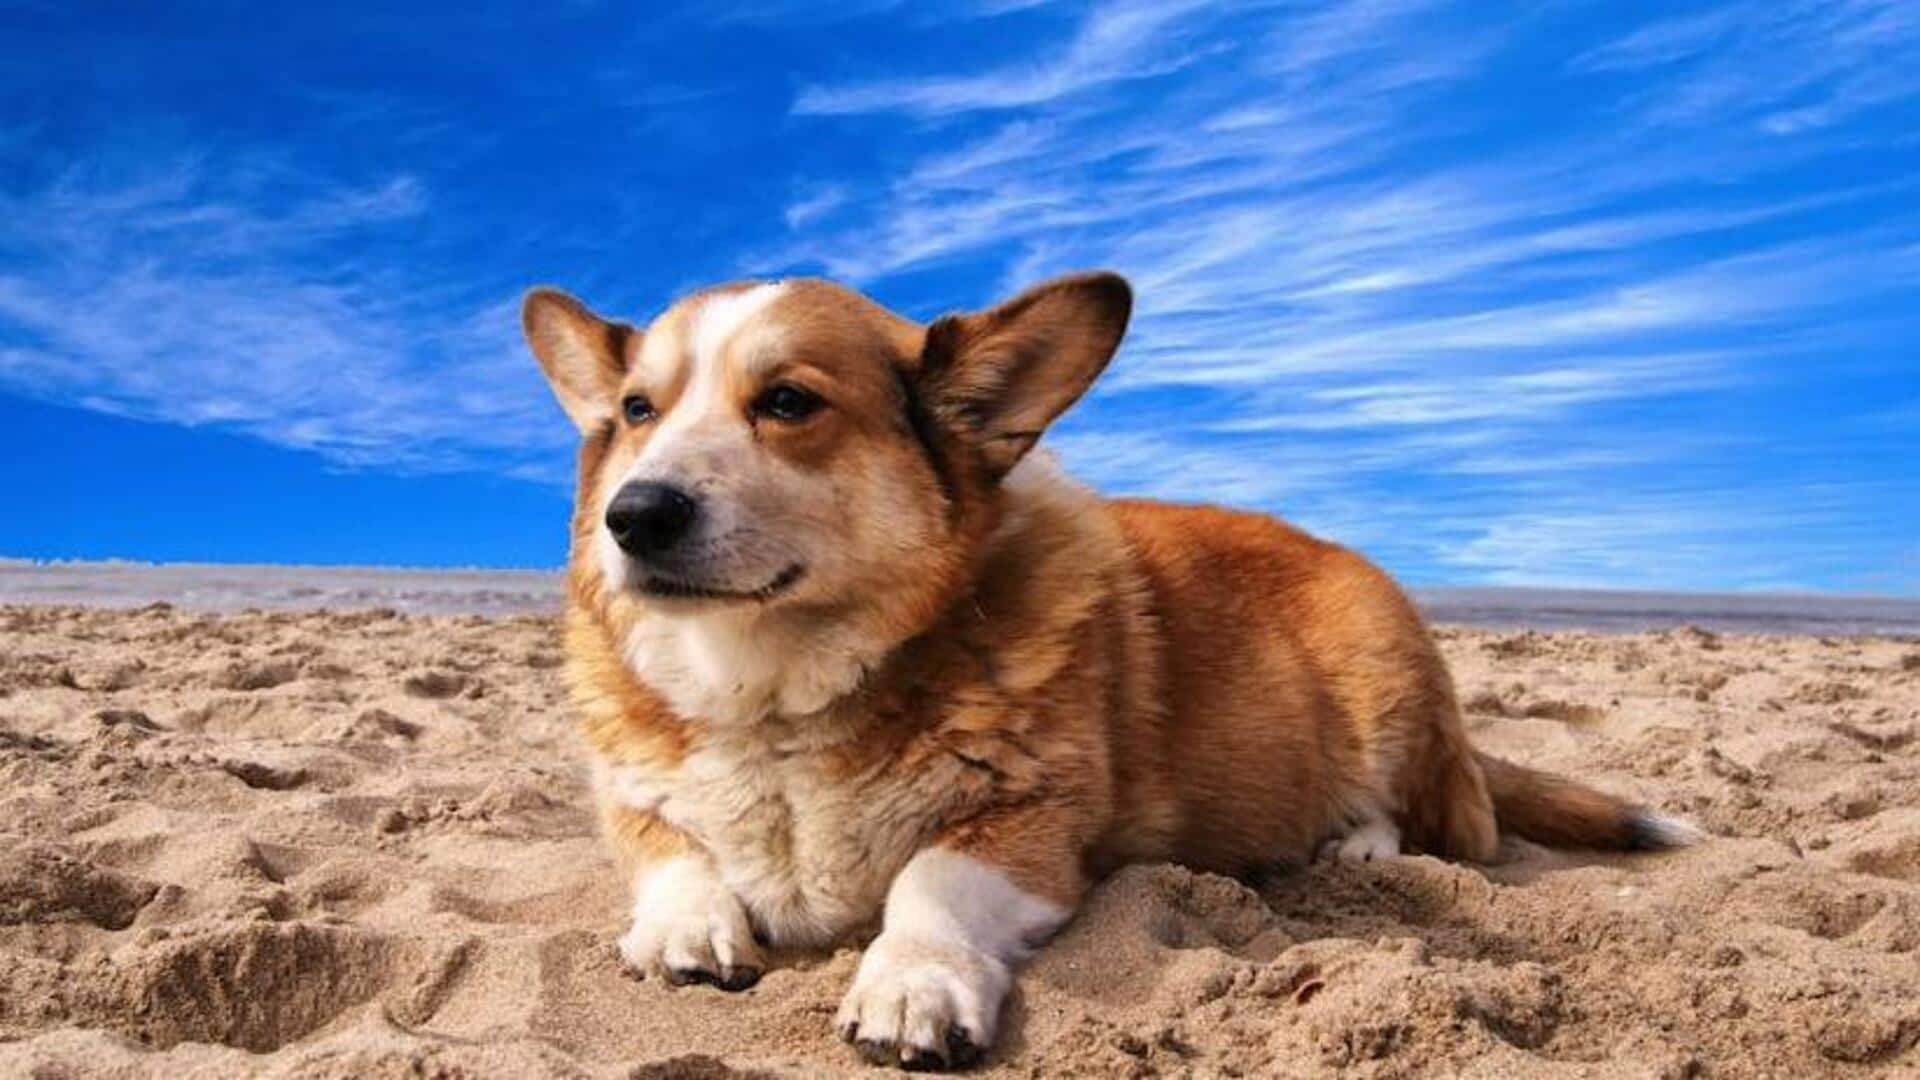 Corgi joint care: Essential exercise tips